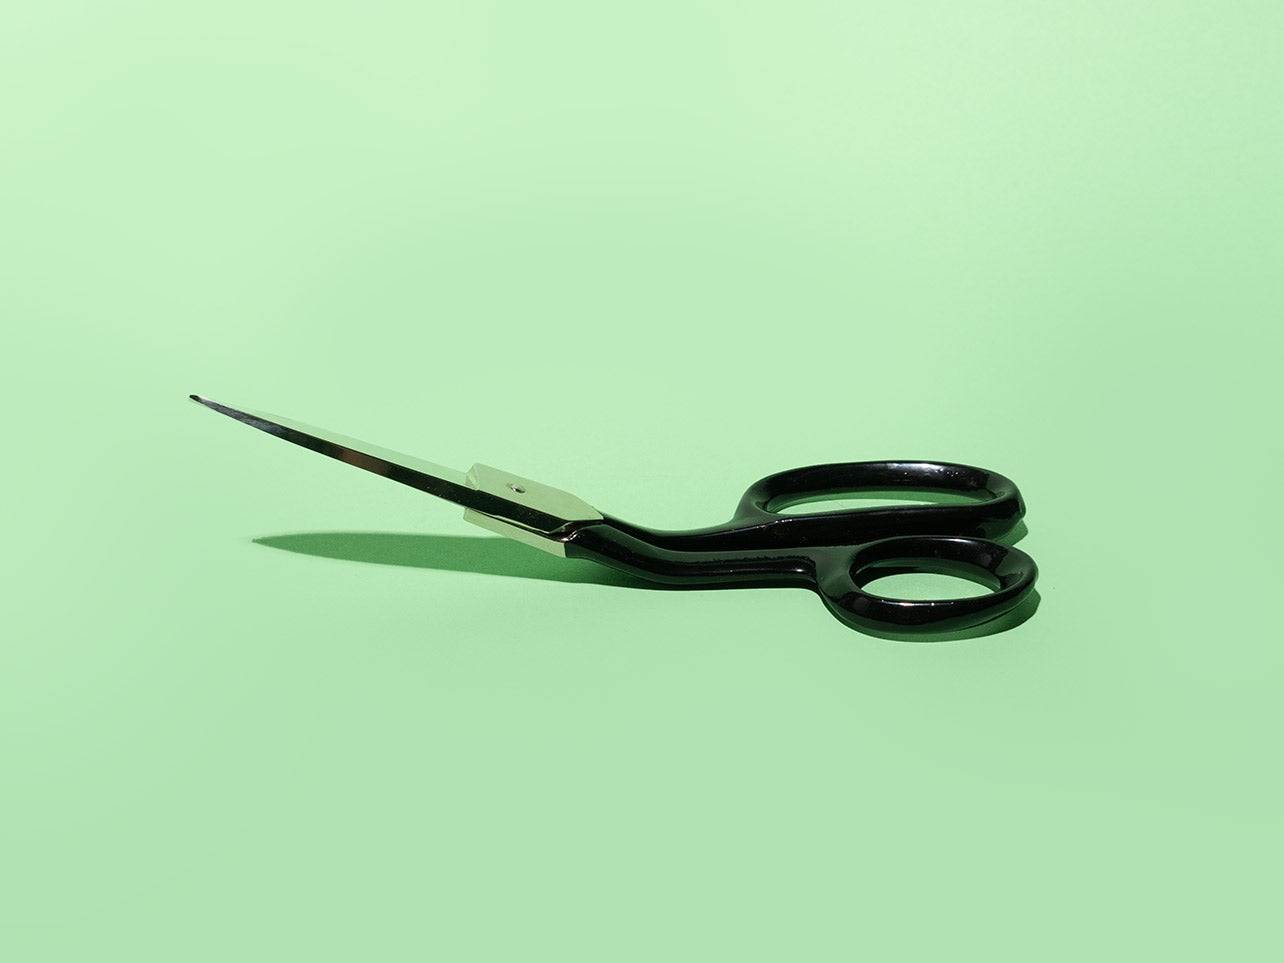 Duckbill scissors for cutting and trimming – Tuftingshop